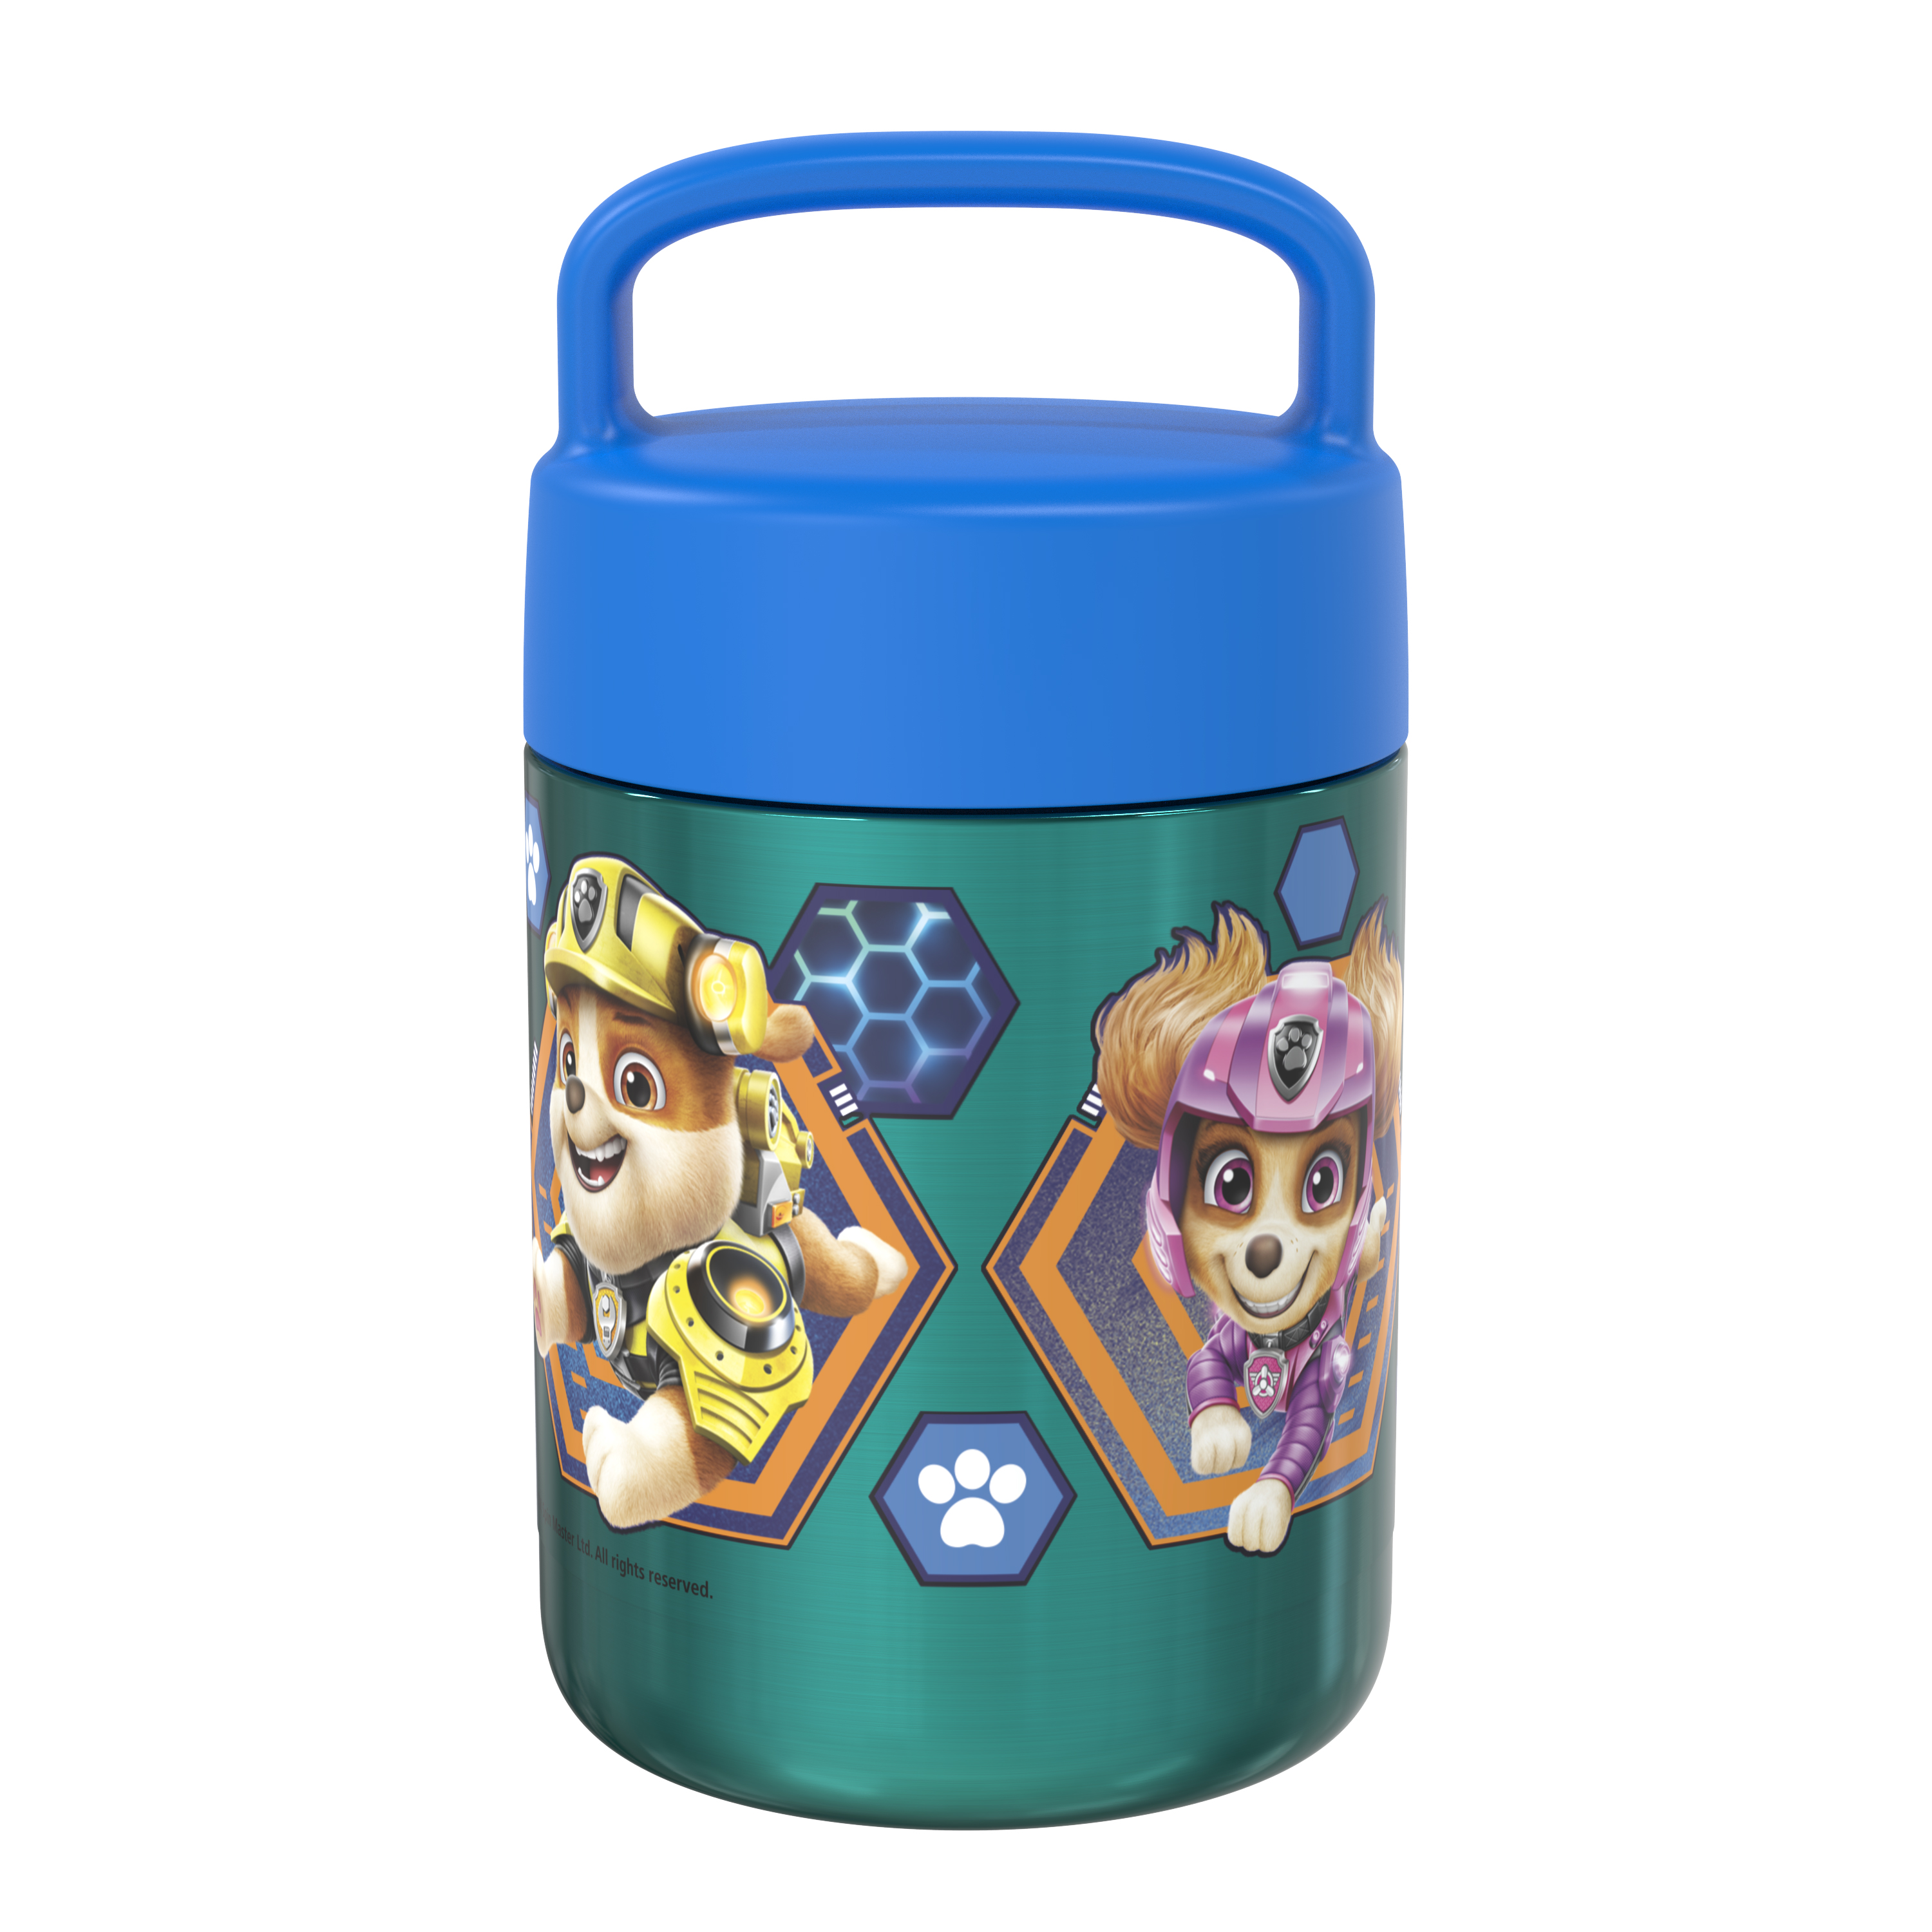 Paw Patrol Movie Reusable Vacuum Insulated Stainless Steel Food Container, Marshall, Chase and Friends slideshow image 2